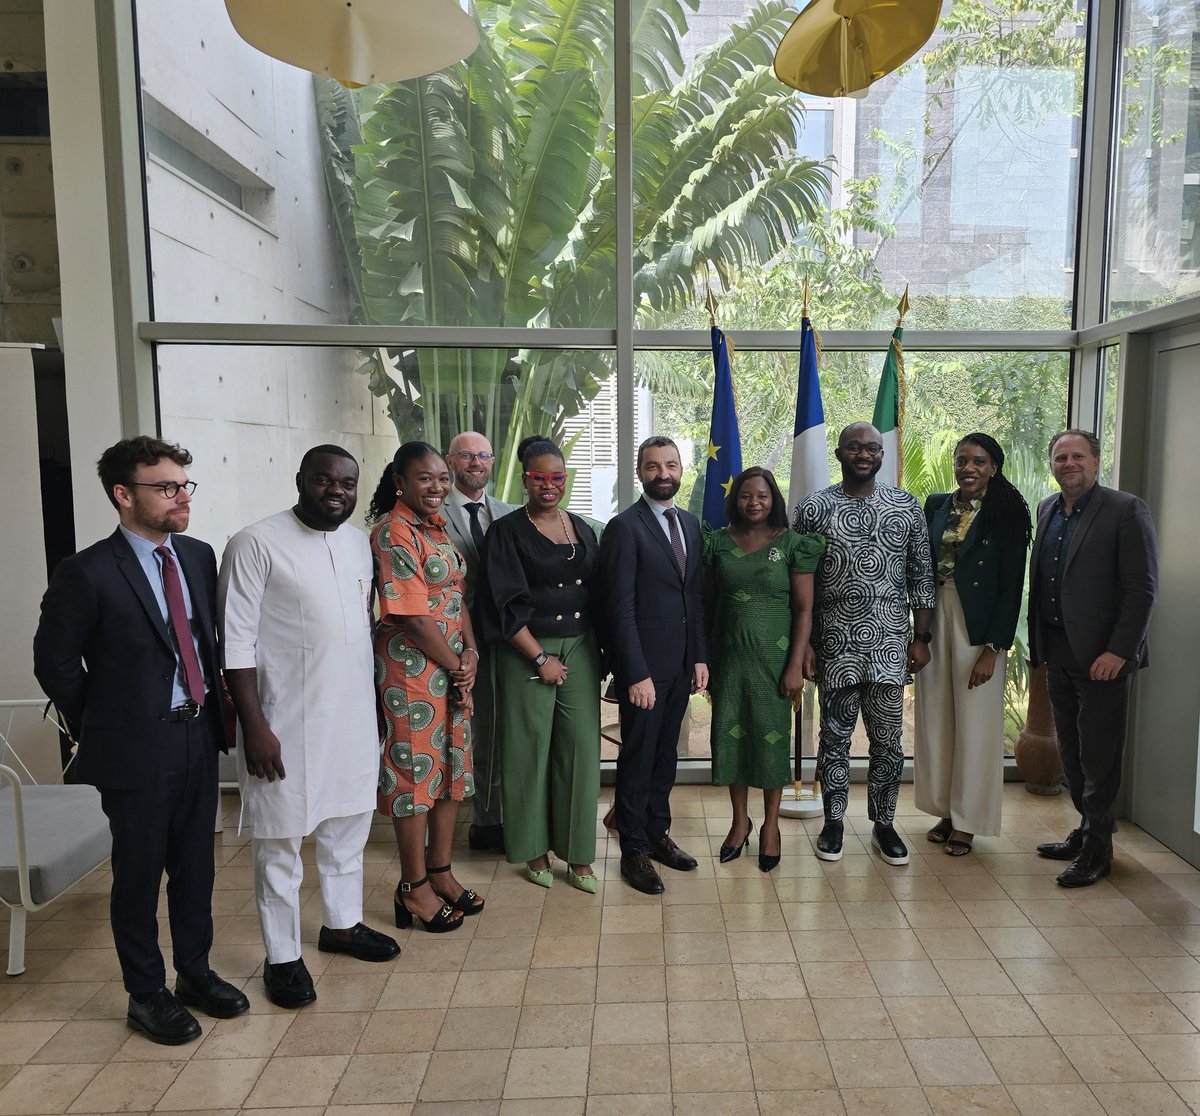 Thank you @YIAGA @cleenfoundation for this brainstorming-lunch at the Residence of France. Civil society is key in making the partnership between 🇳🇬 and 🇲🇫 a success.